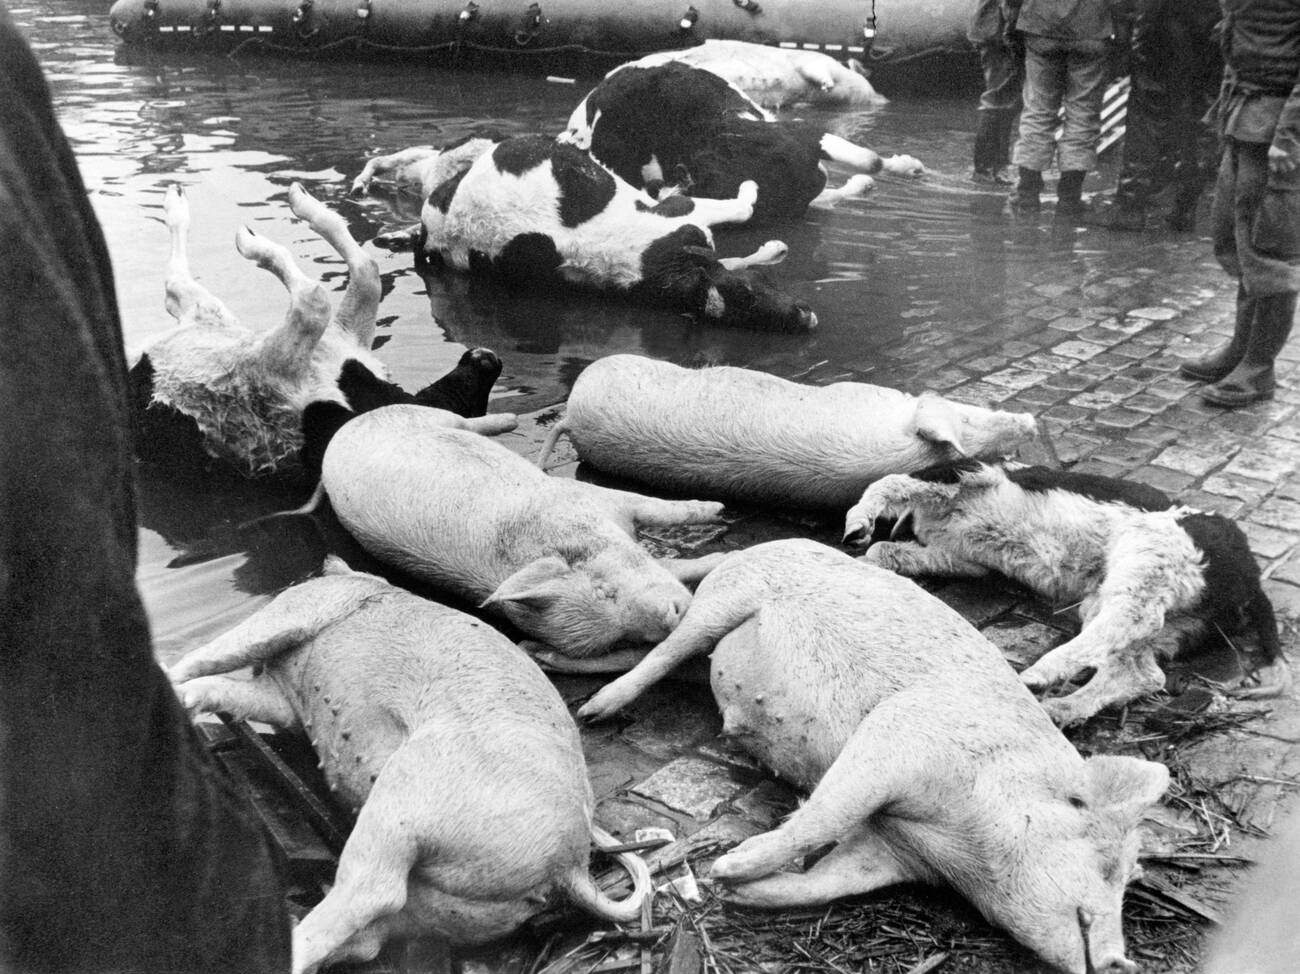 Livestock drowned during the North Sea Flood of 1962